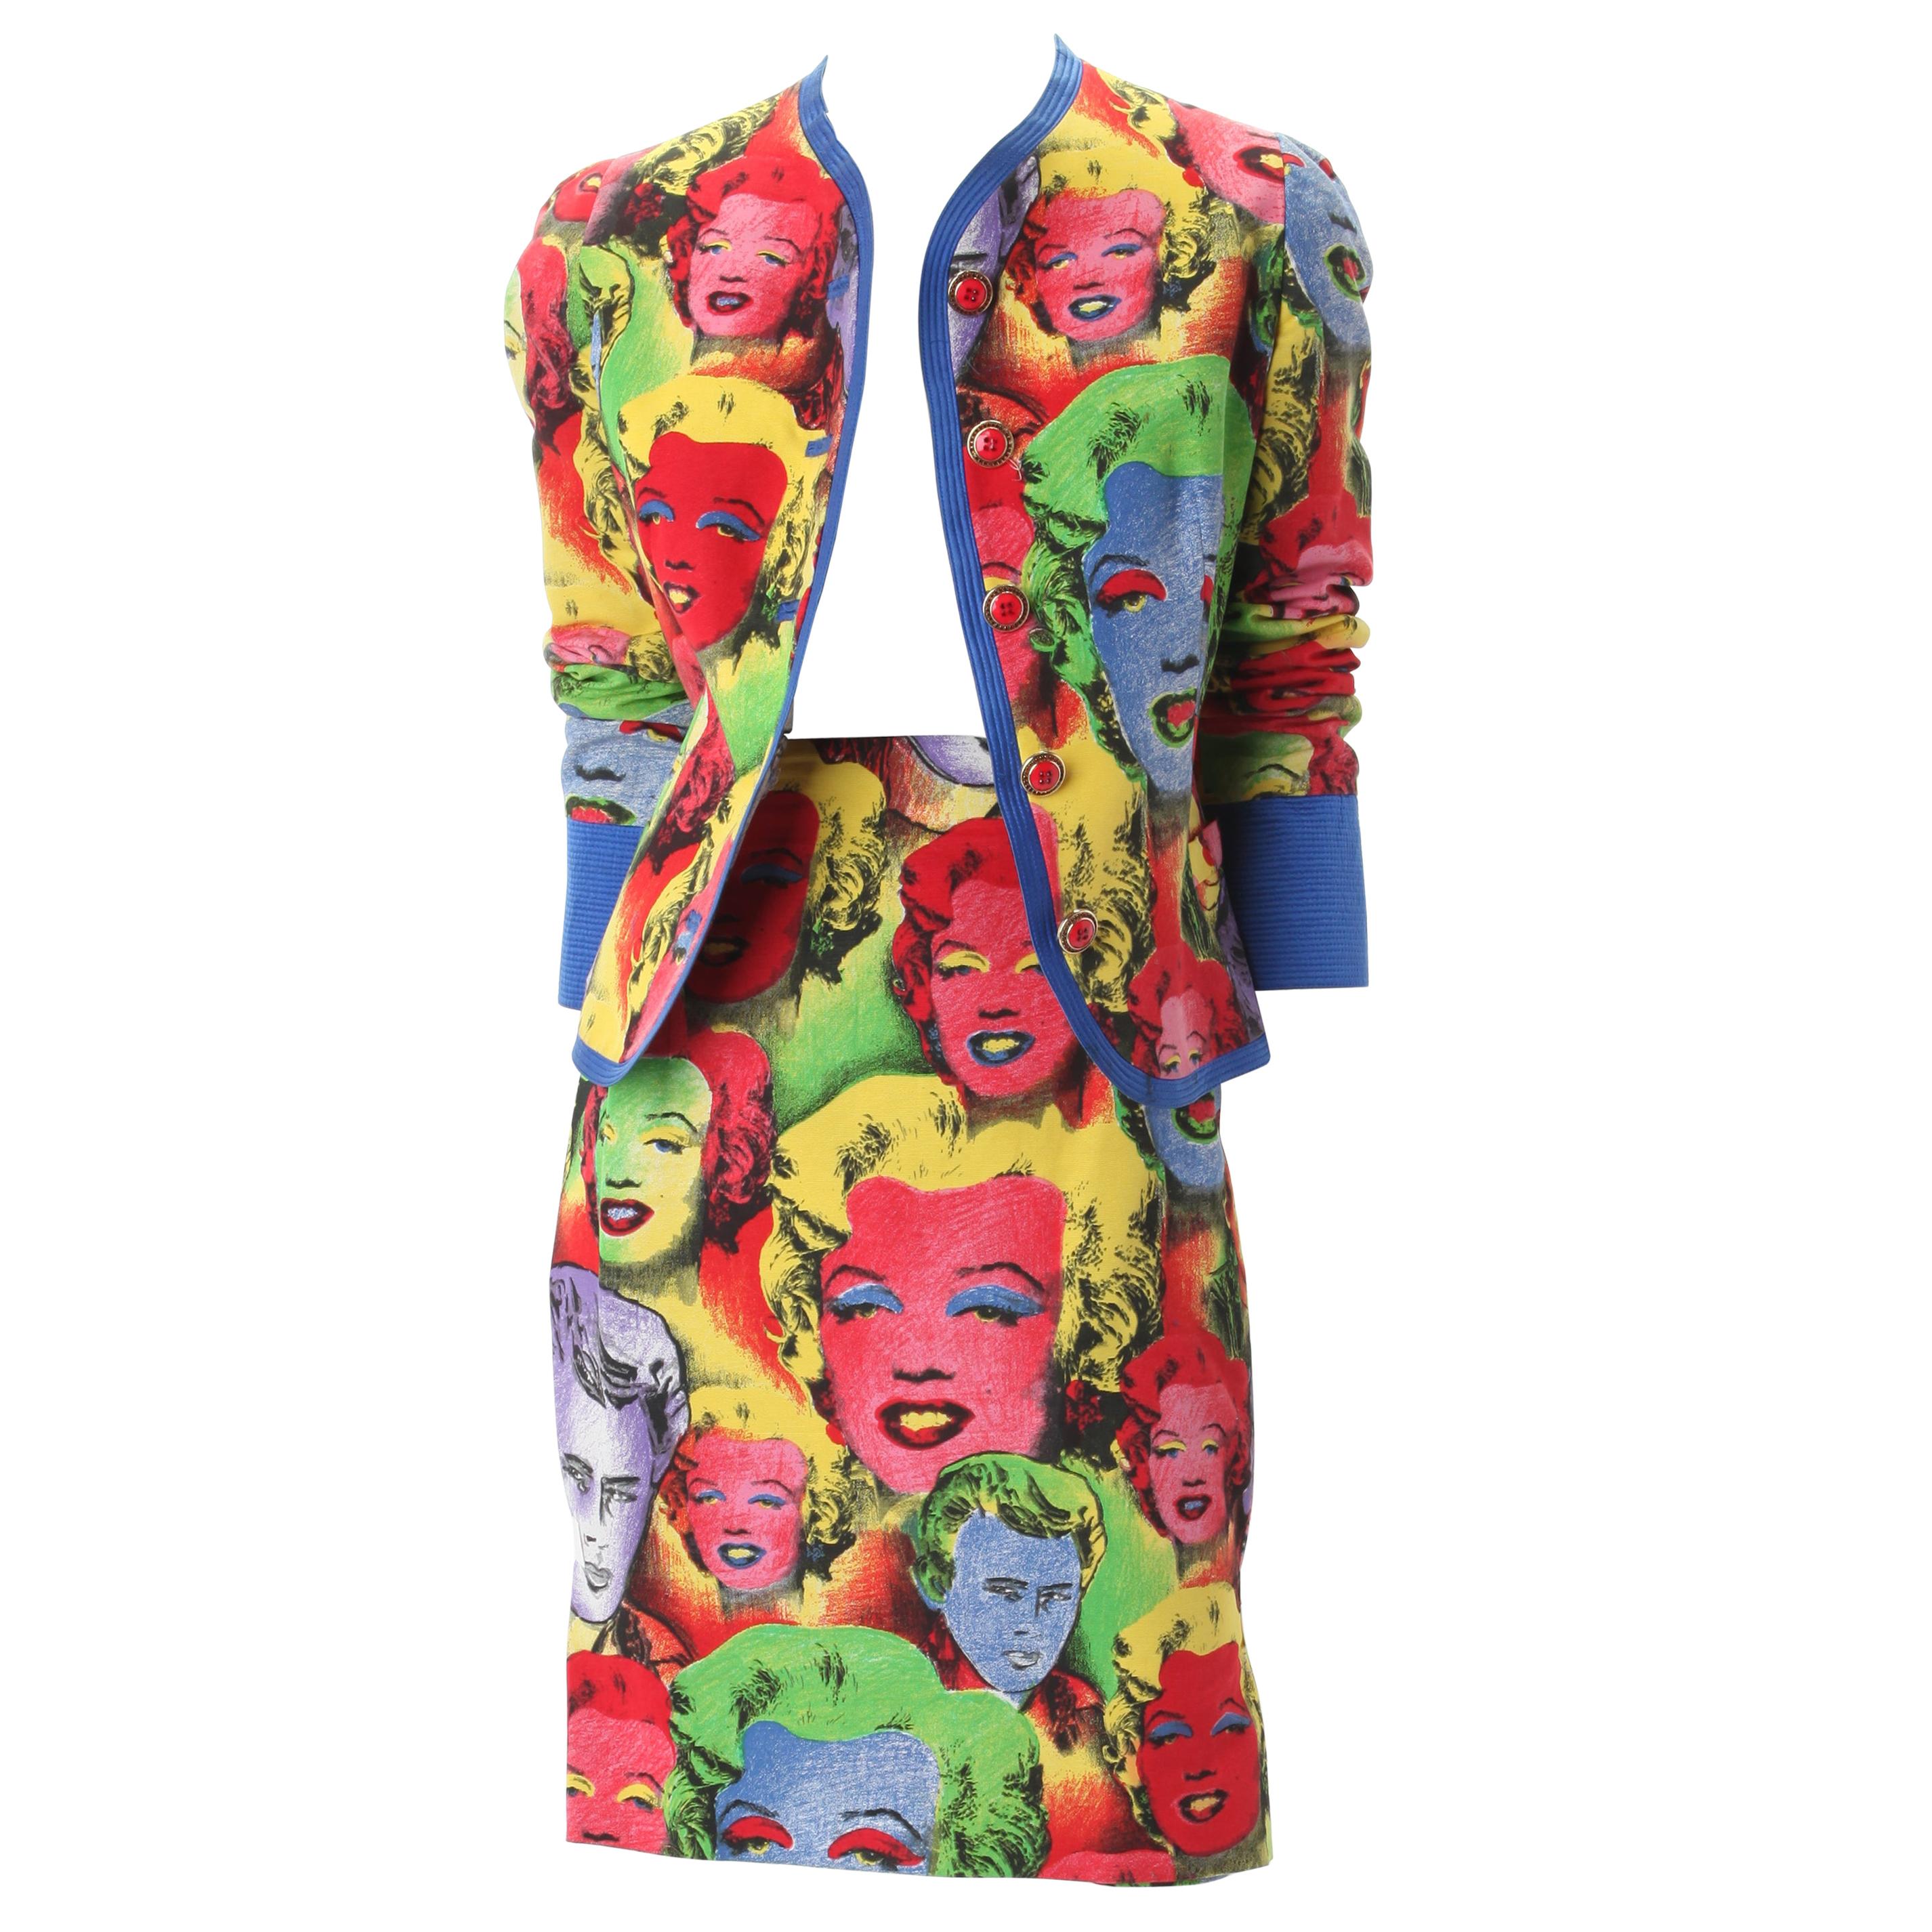 Gianni Versace Couture Andy Warhol Print Jacket and Skirt Ensemble, c.1990.